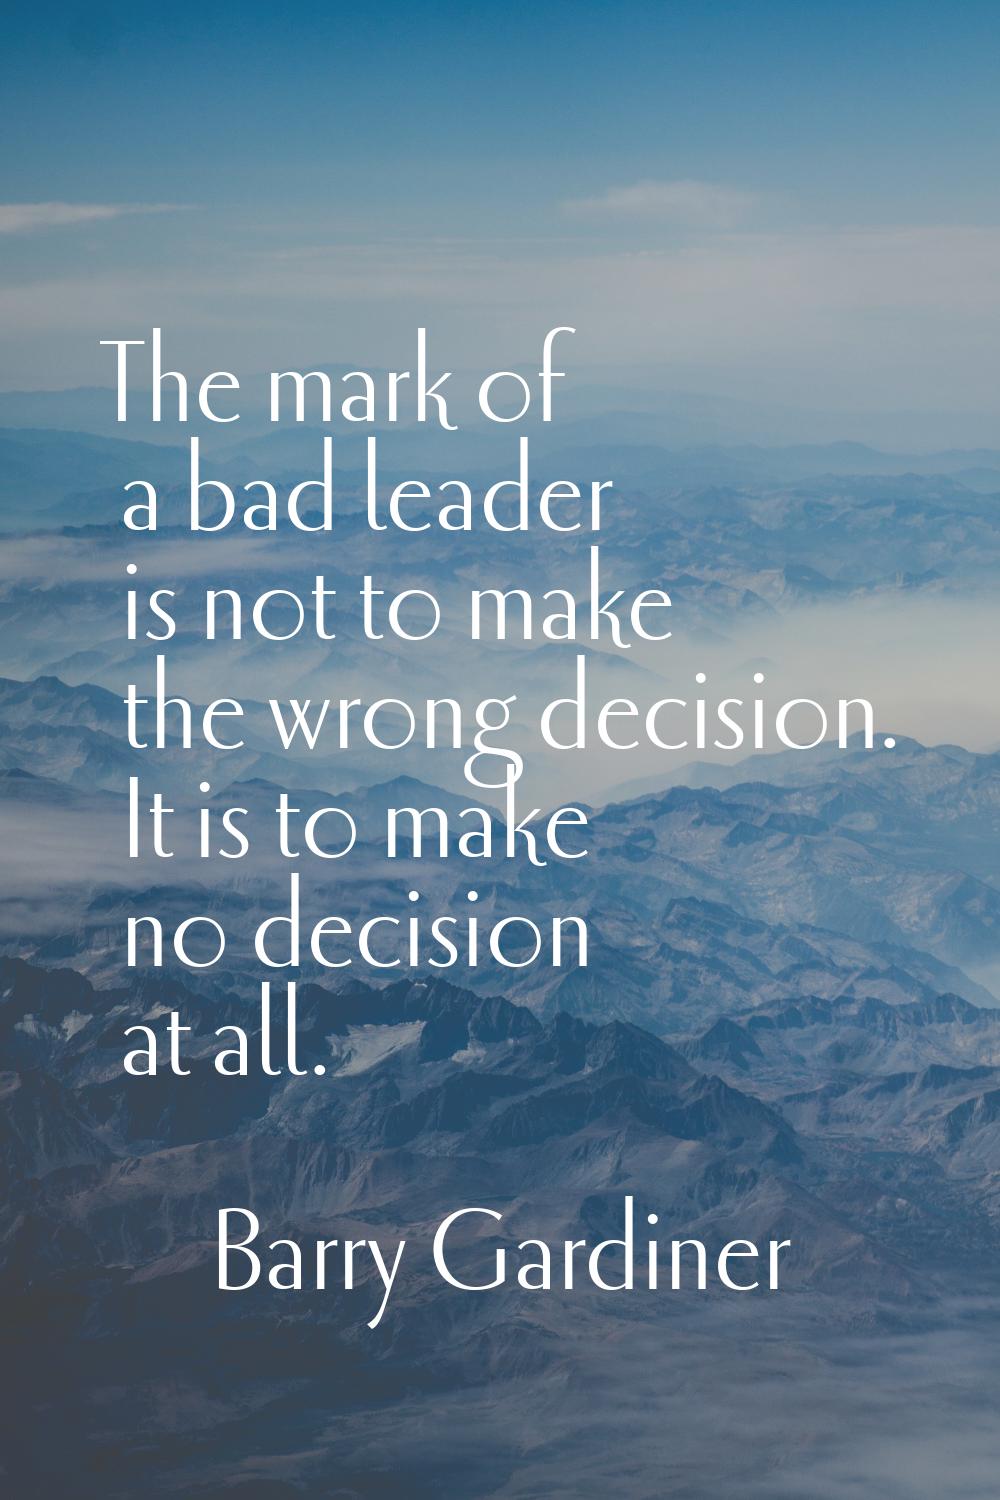 The mark of a bad leader is not to make the wrong decision. It is to make no decision at all.